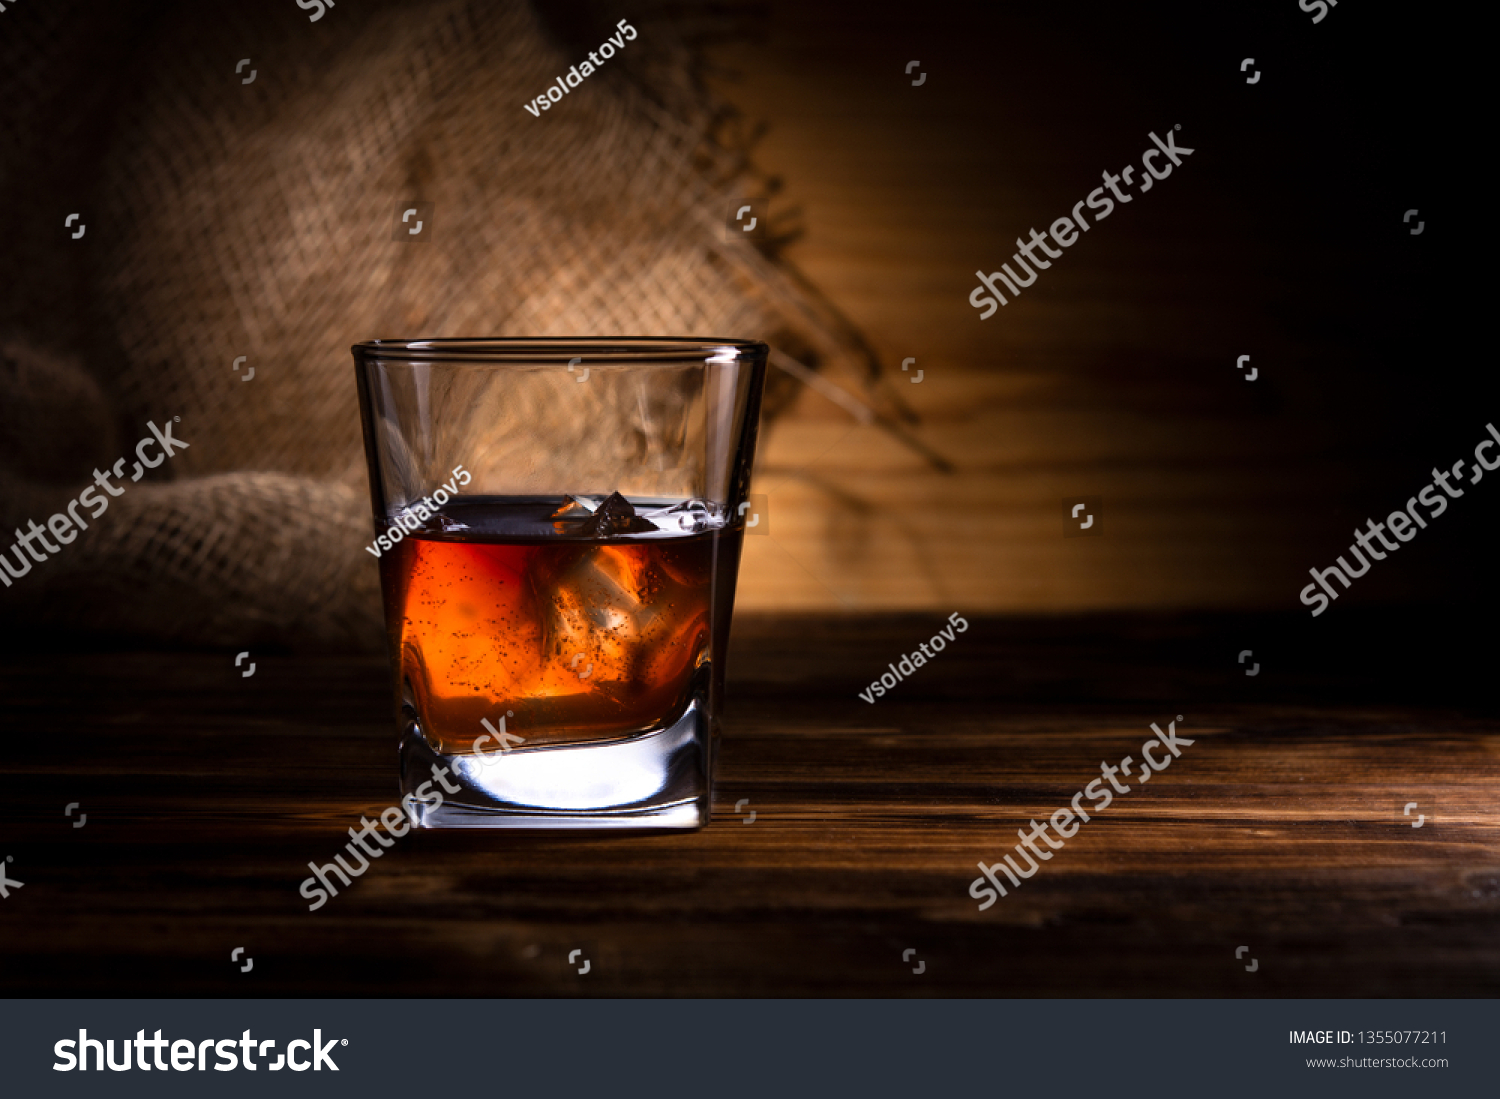 glass of whiskey or cognac on a wooden background #1355077211